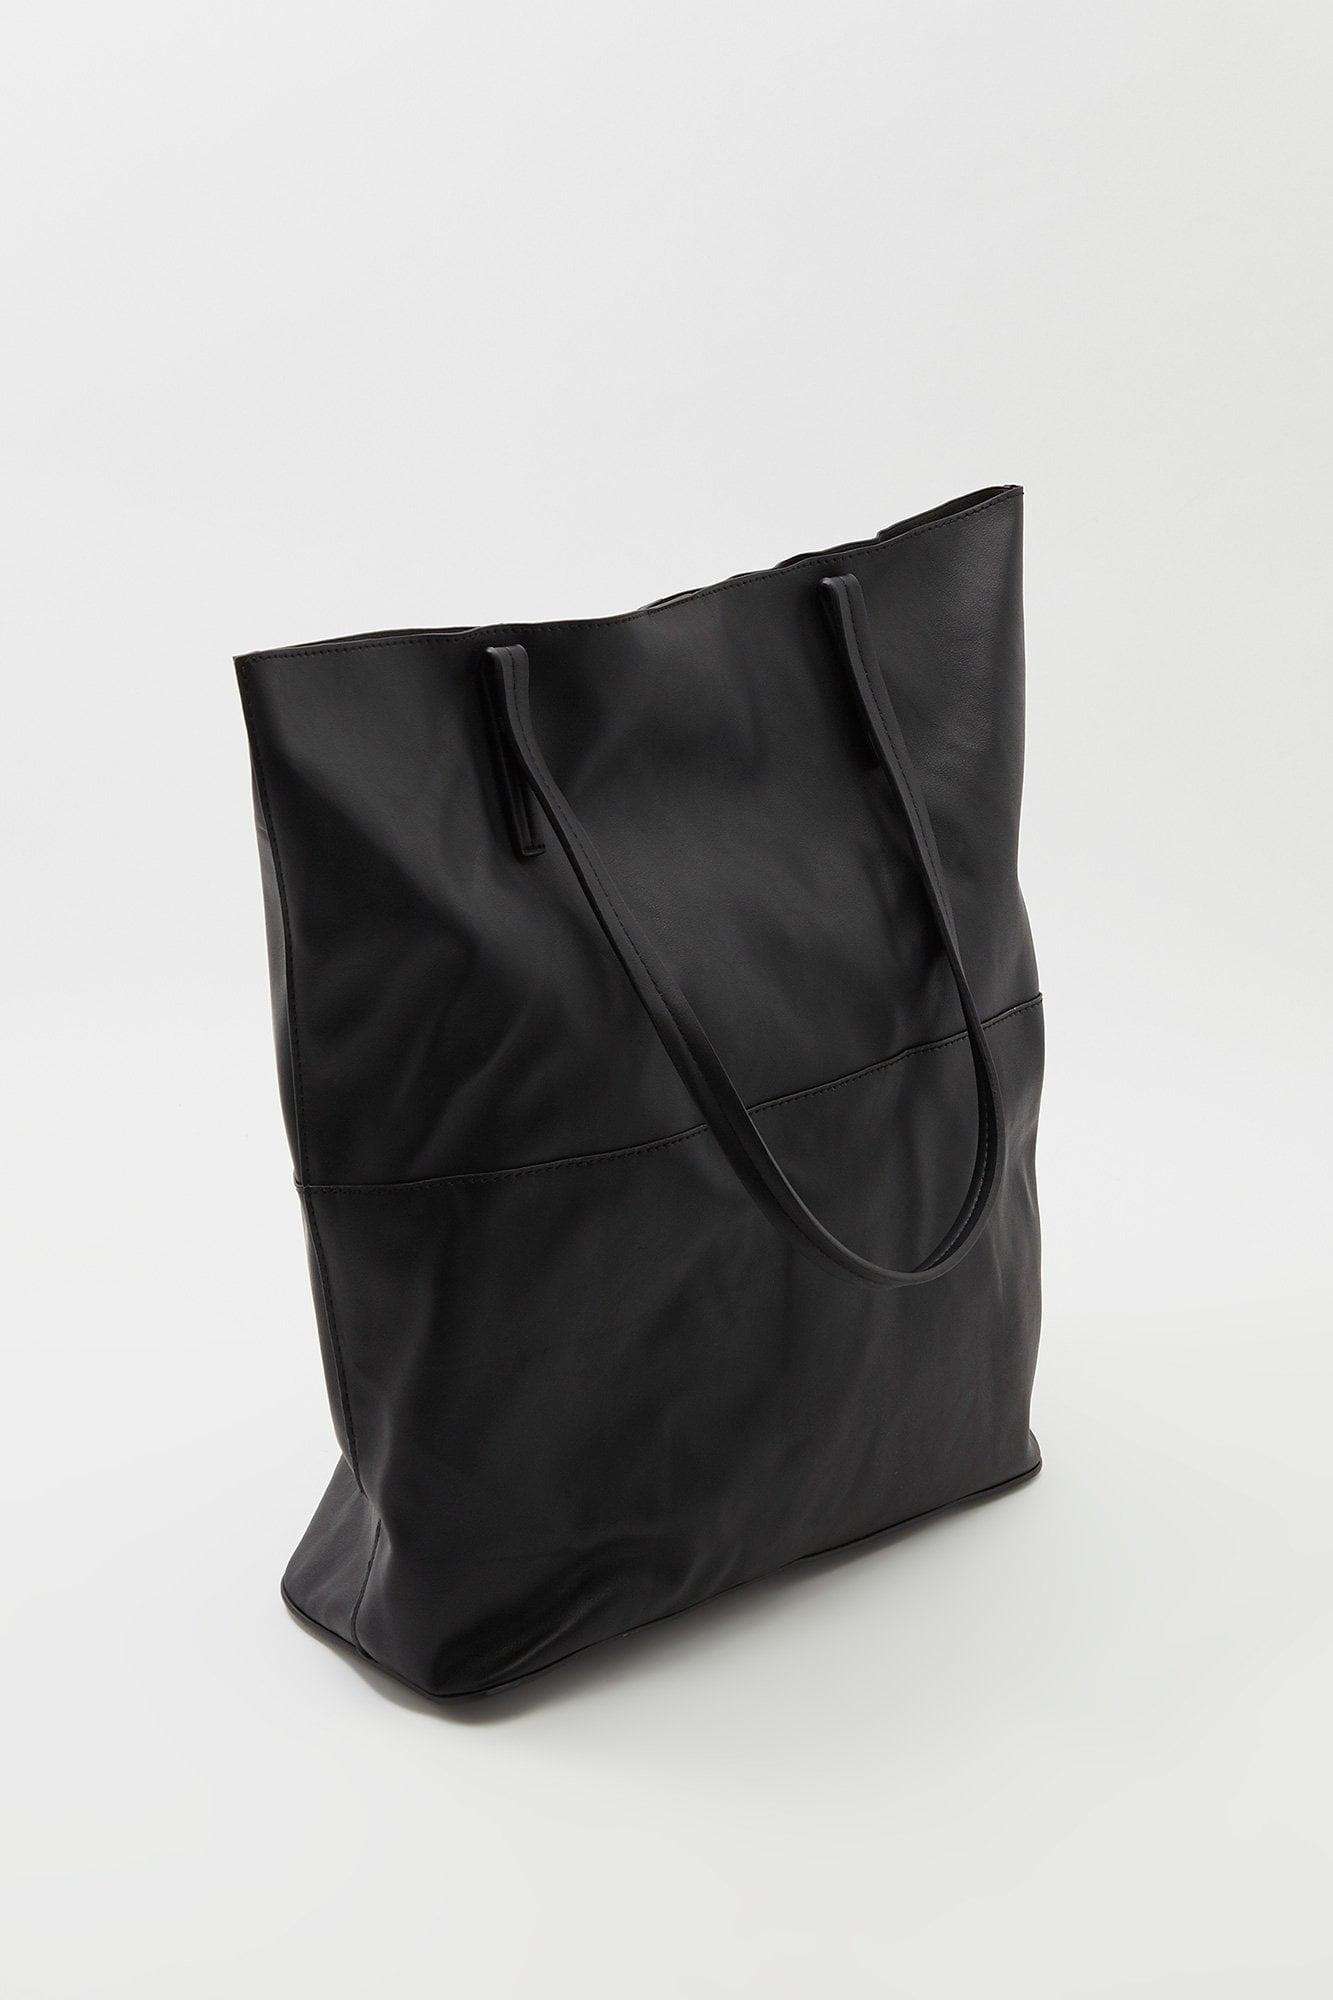 Bags for Good - Recycled Polyester Bags - Sustainable Fashion | Orla Kiely